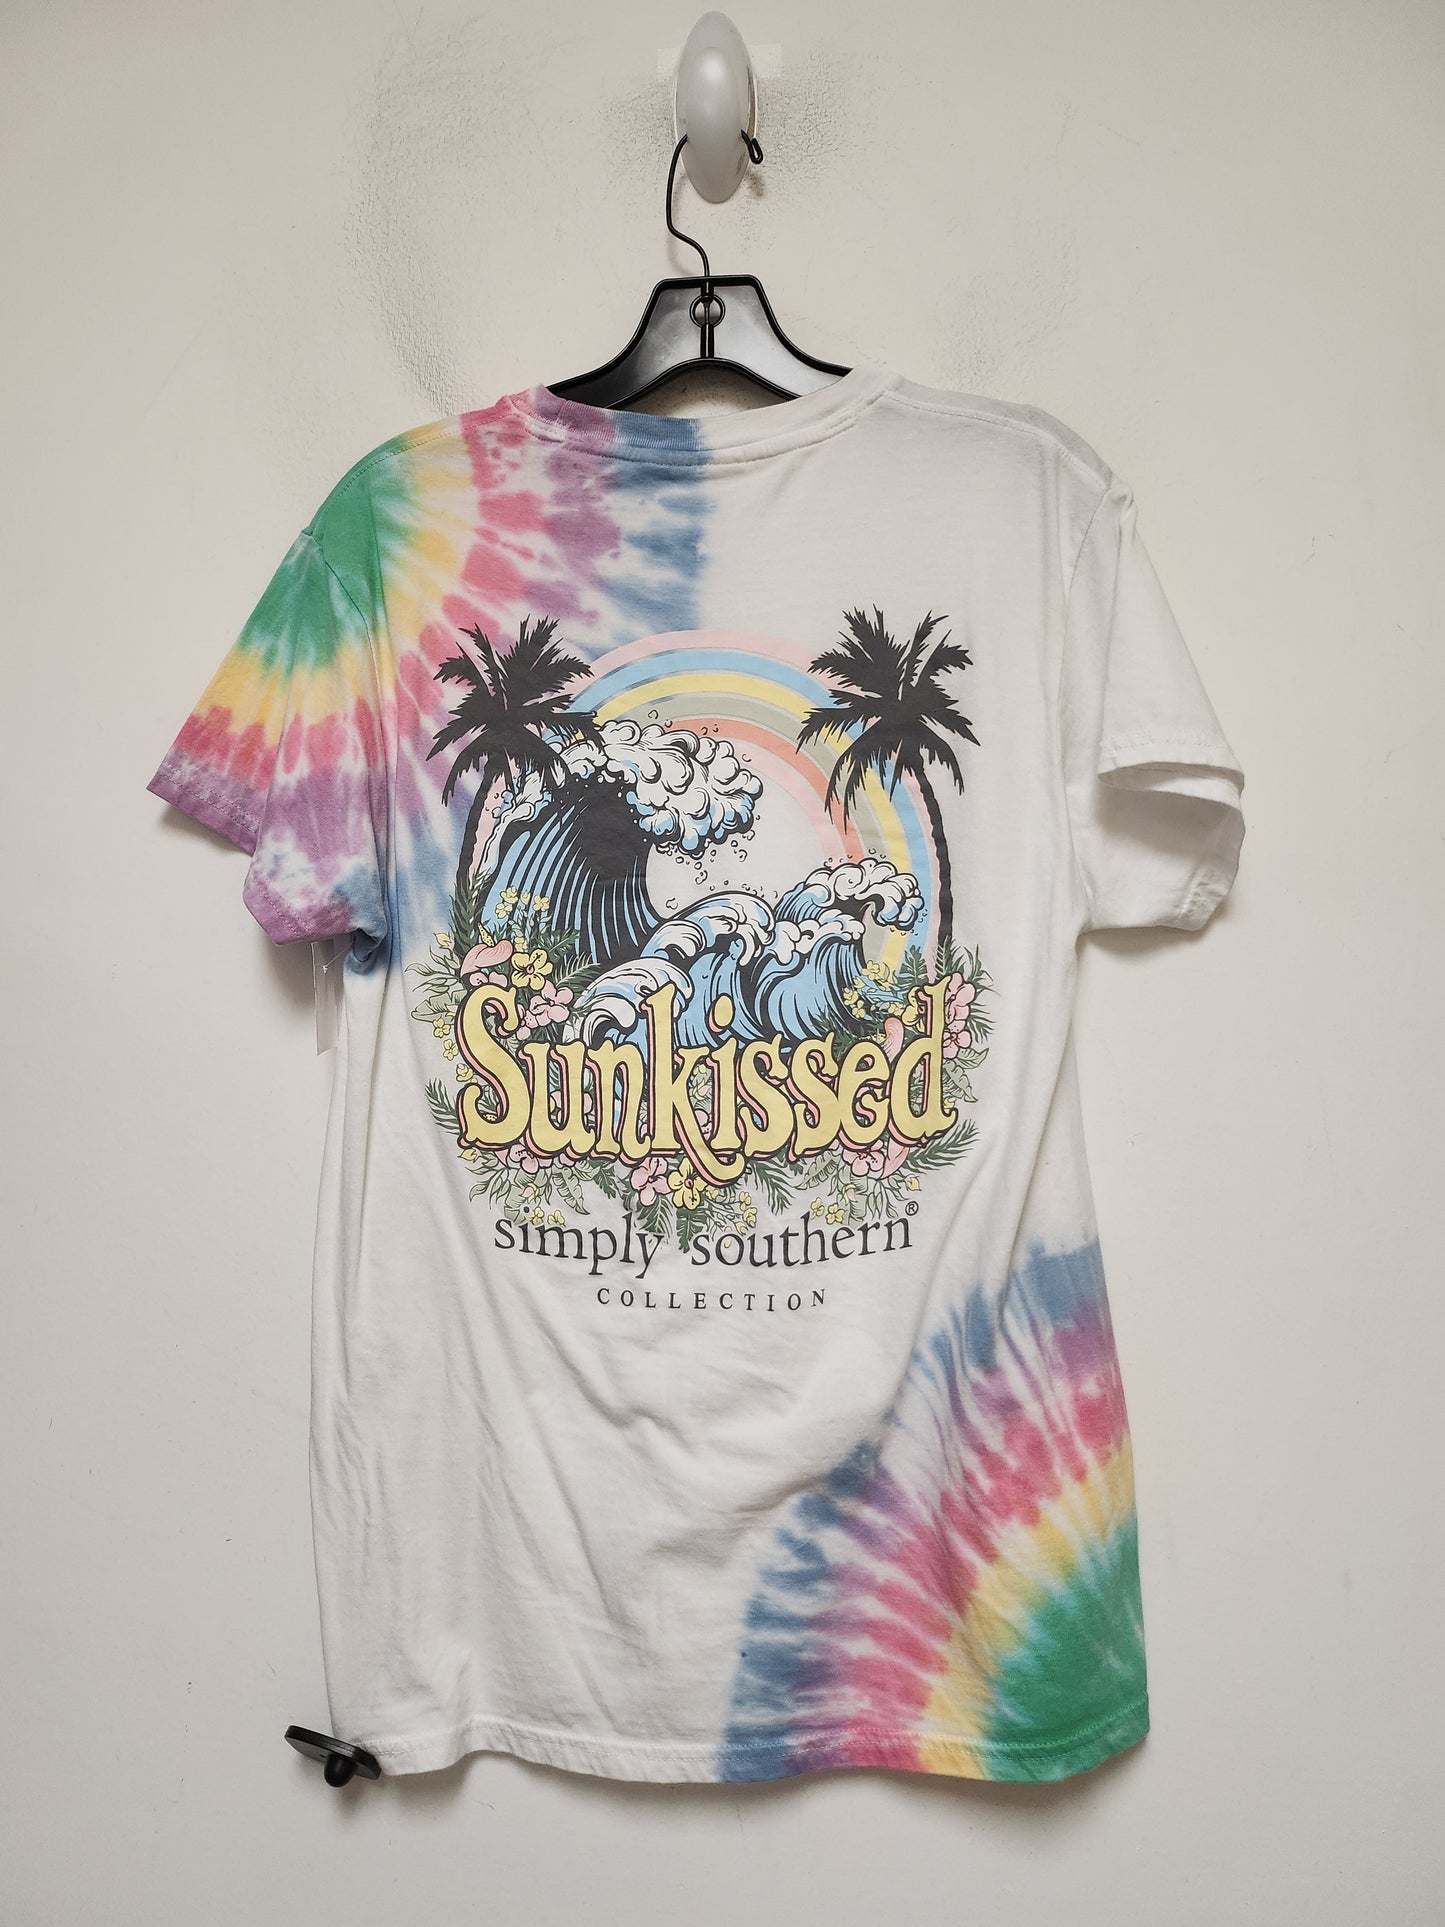 Tie Dye Print Top Short Sleeve Basic Simply Southern, Size S